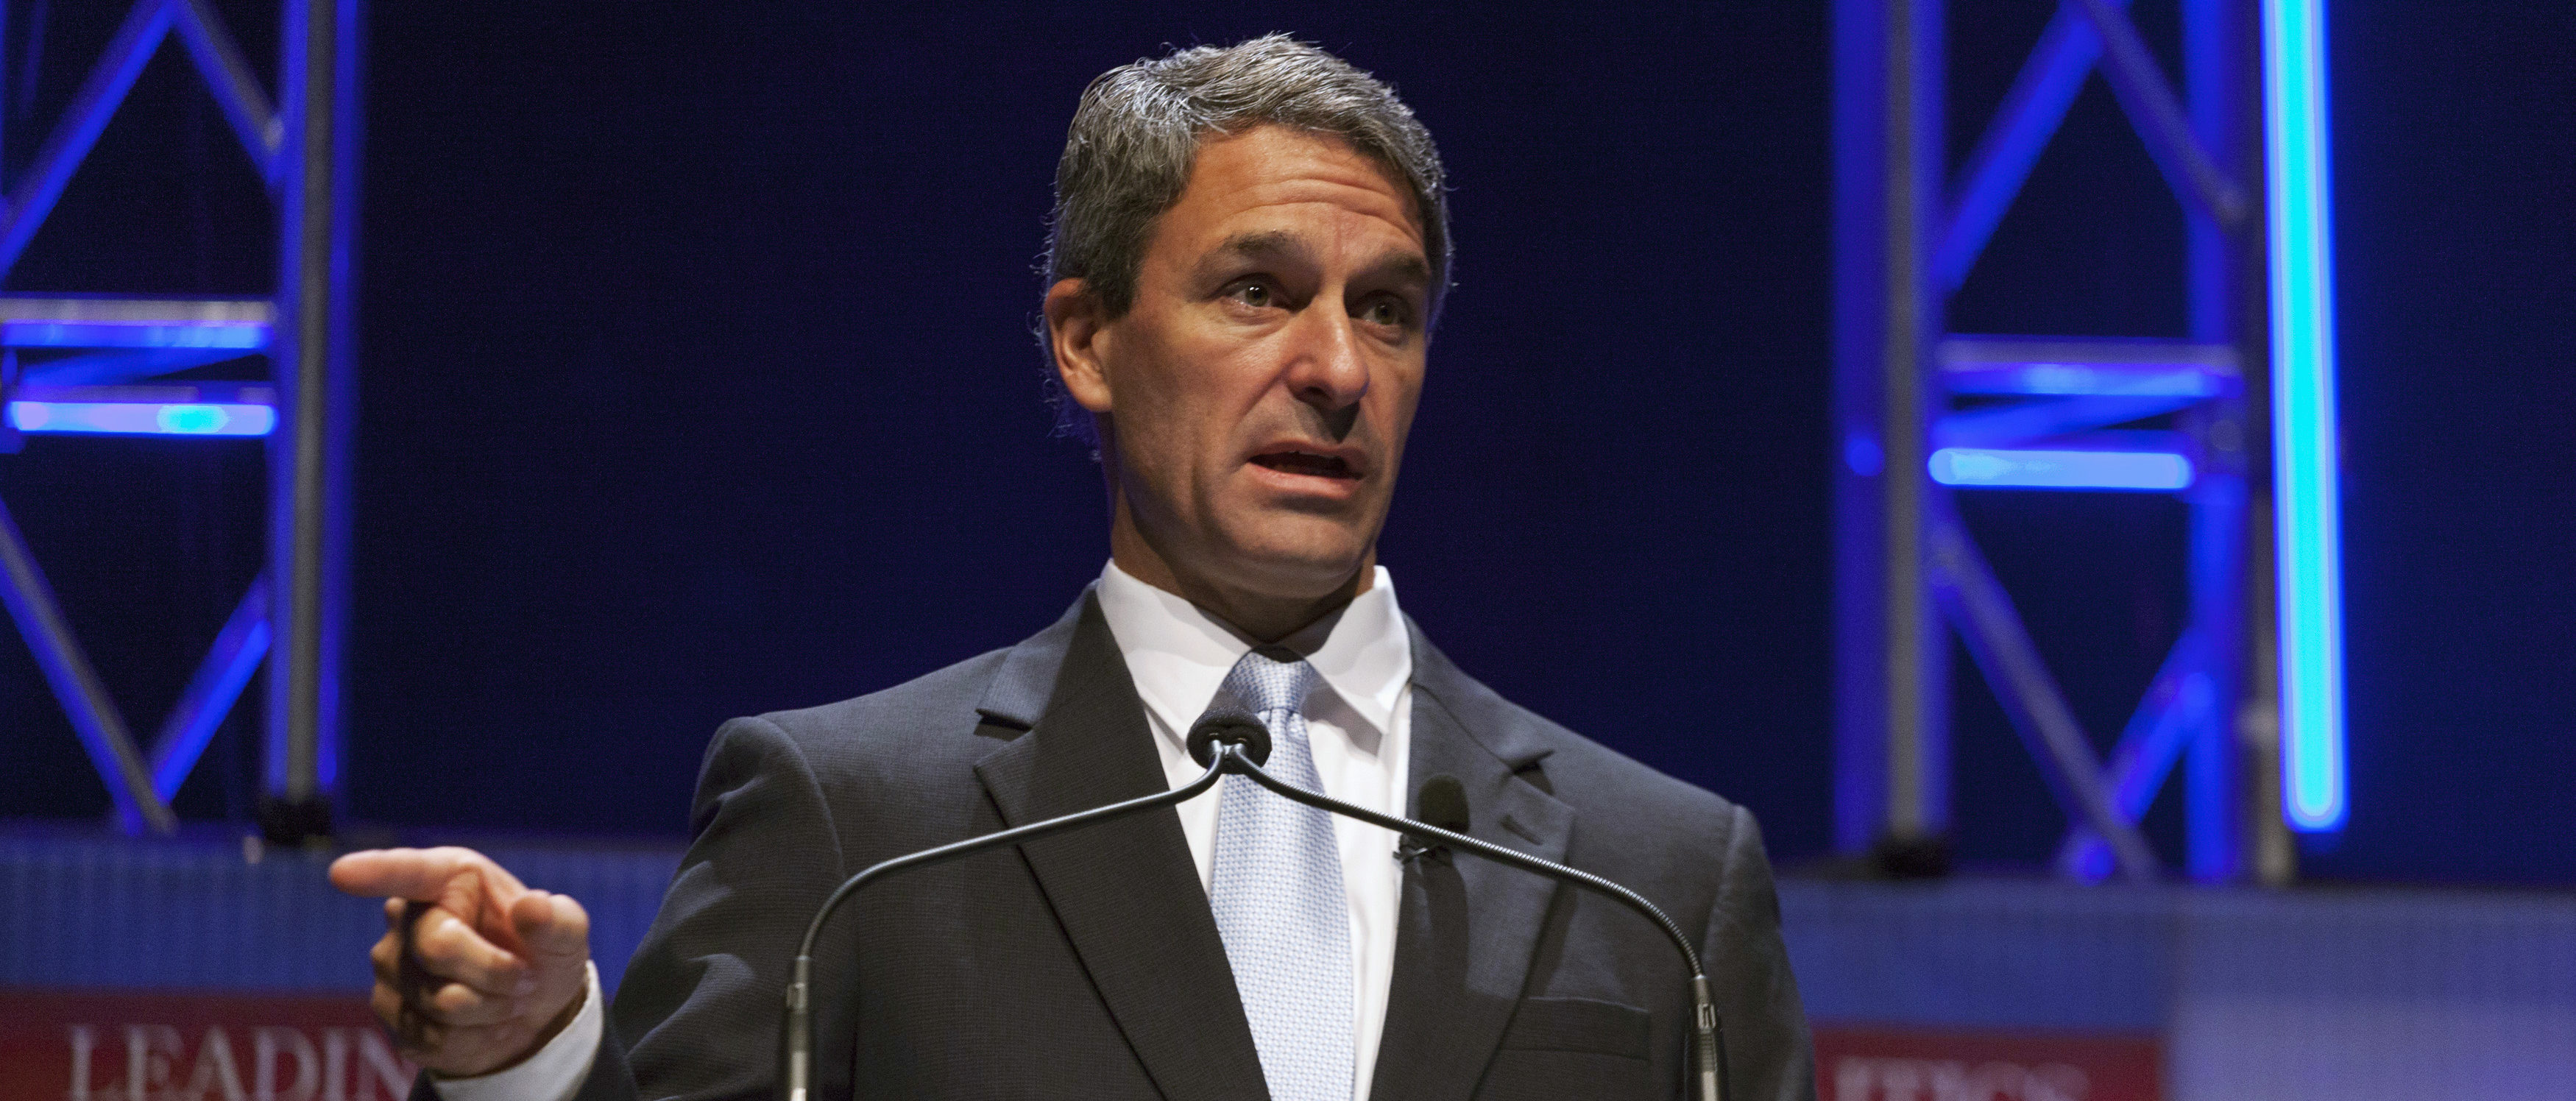 Former Virginia Attorney General Ken Cuccinelli speaks at the Family Leadership Summit in Ames, Iowa August 9, 2014. The pro-family Iowa organization is hosting the event in conjunction with national partners Family Research Council Action and Citizens United. REUTERS/Brian Frank? (UNITED STATES - Tags: POLITICS BUSINESS)